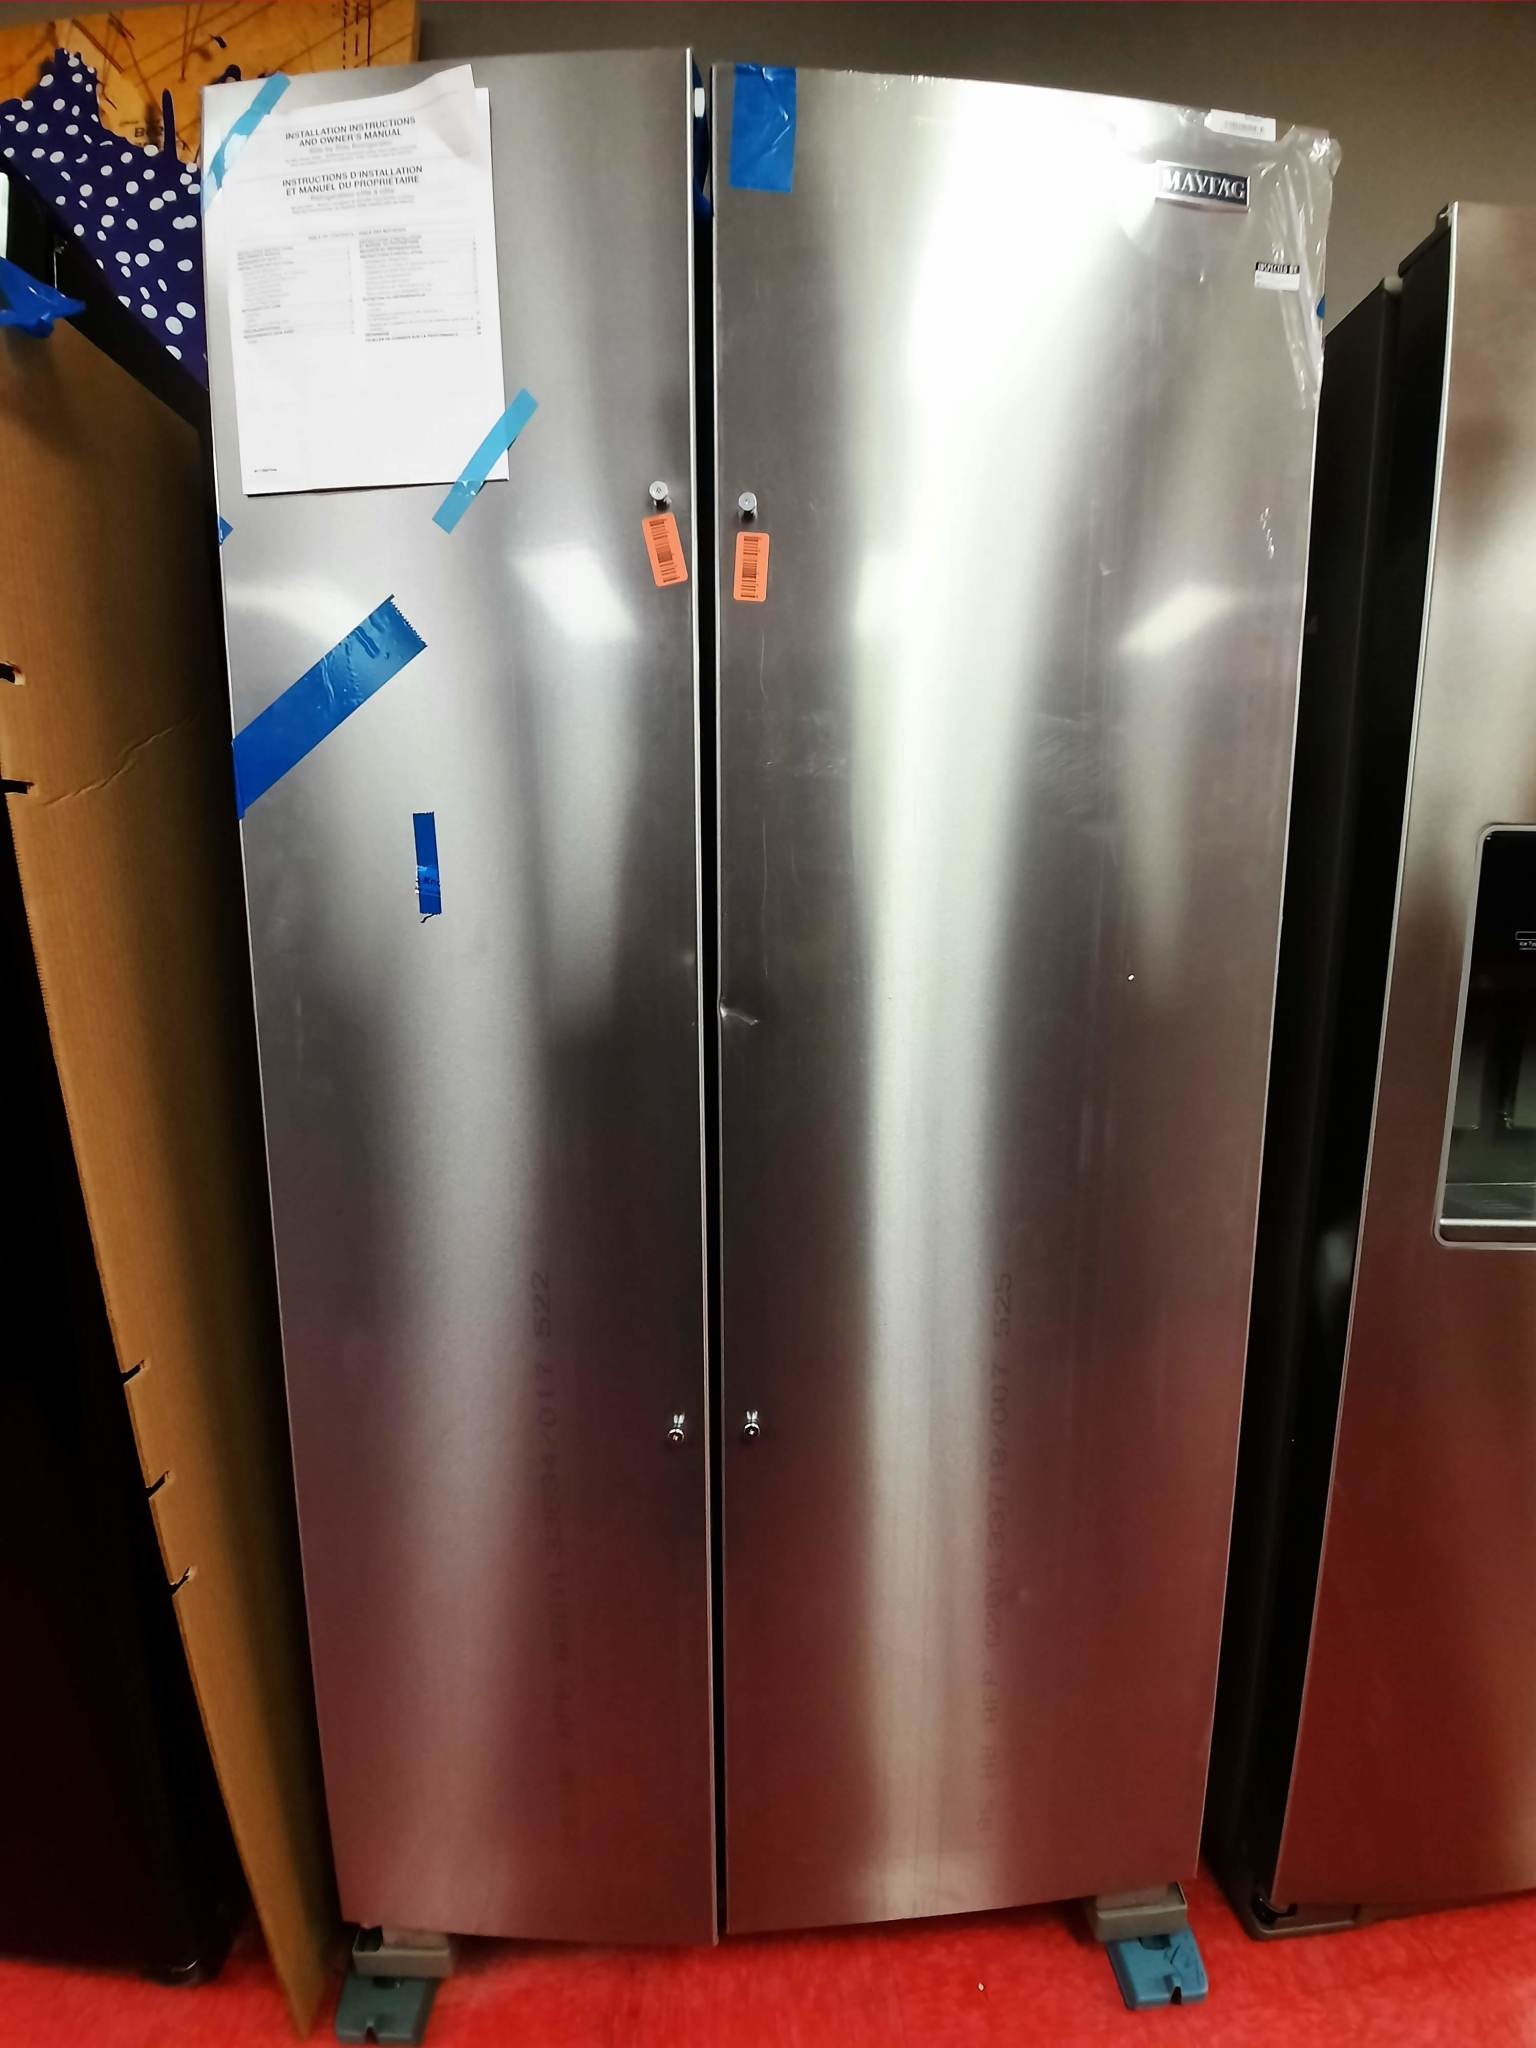 Maytag *Maytag  MSS25N4MKZ 25-cu ft Side-by-Side Refrigerator with LED Lights - Fingerprint Resistant Stainless Steel